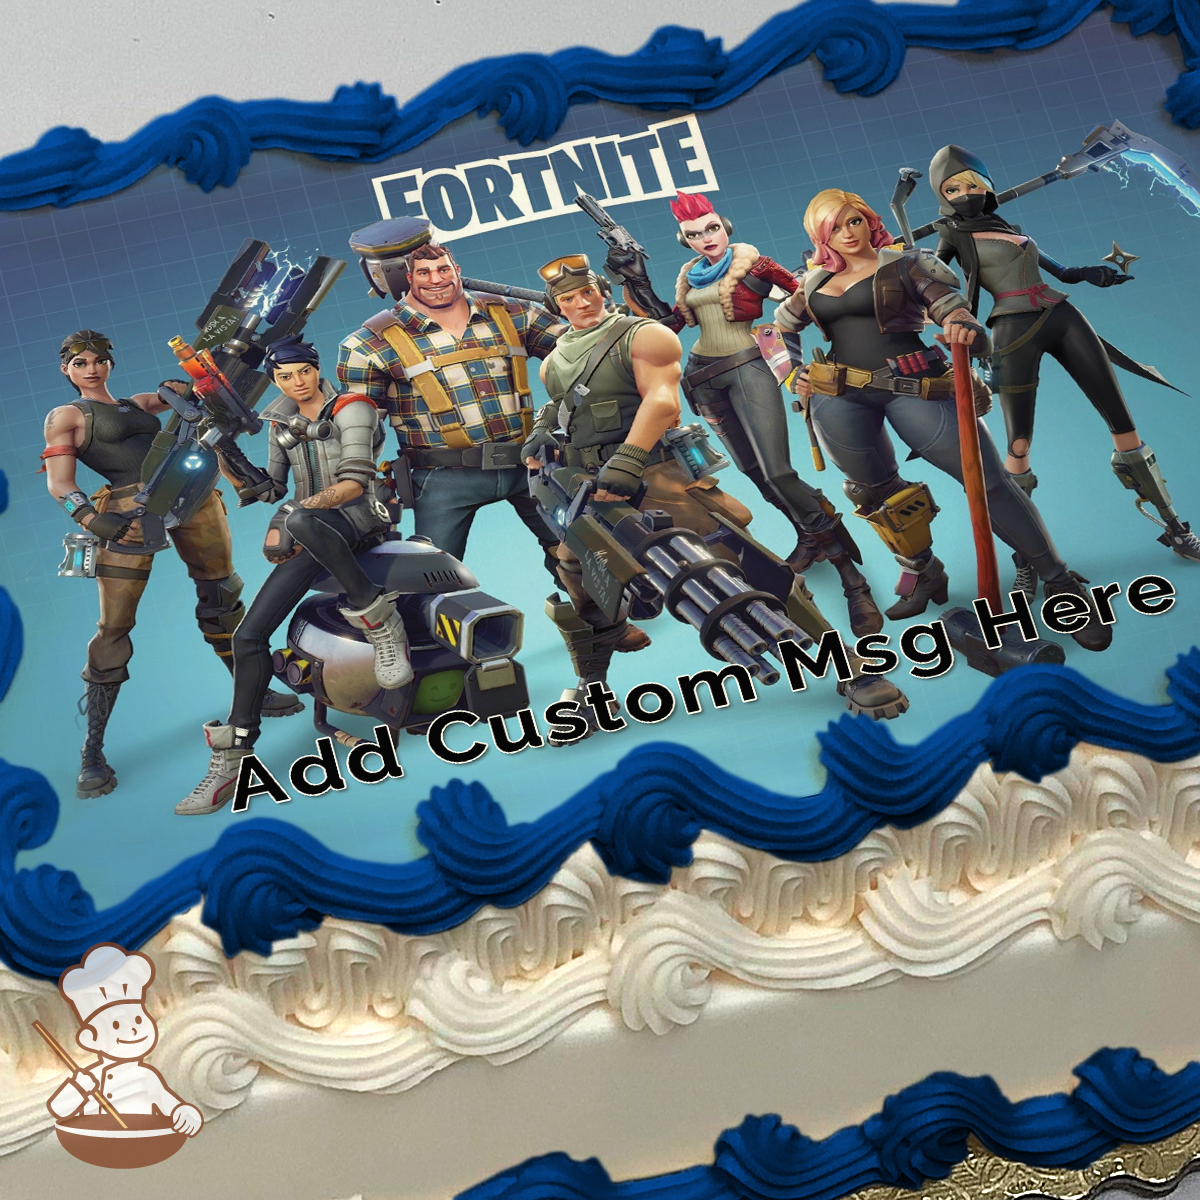 Popular Fortnite characters printed on extra cake layer and decorated on rectangle sheet cake.